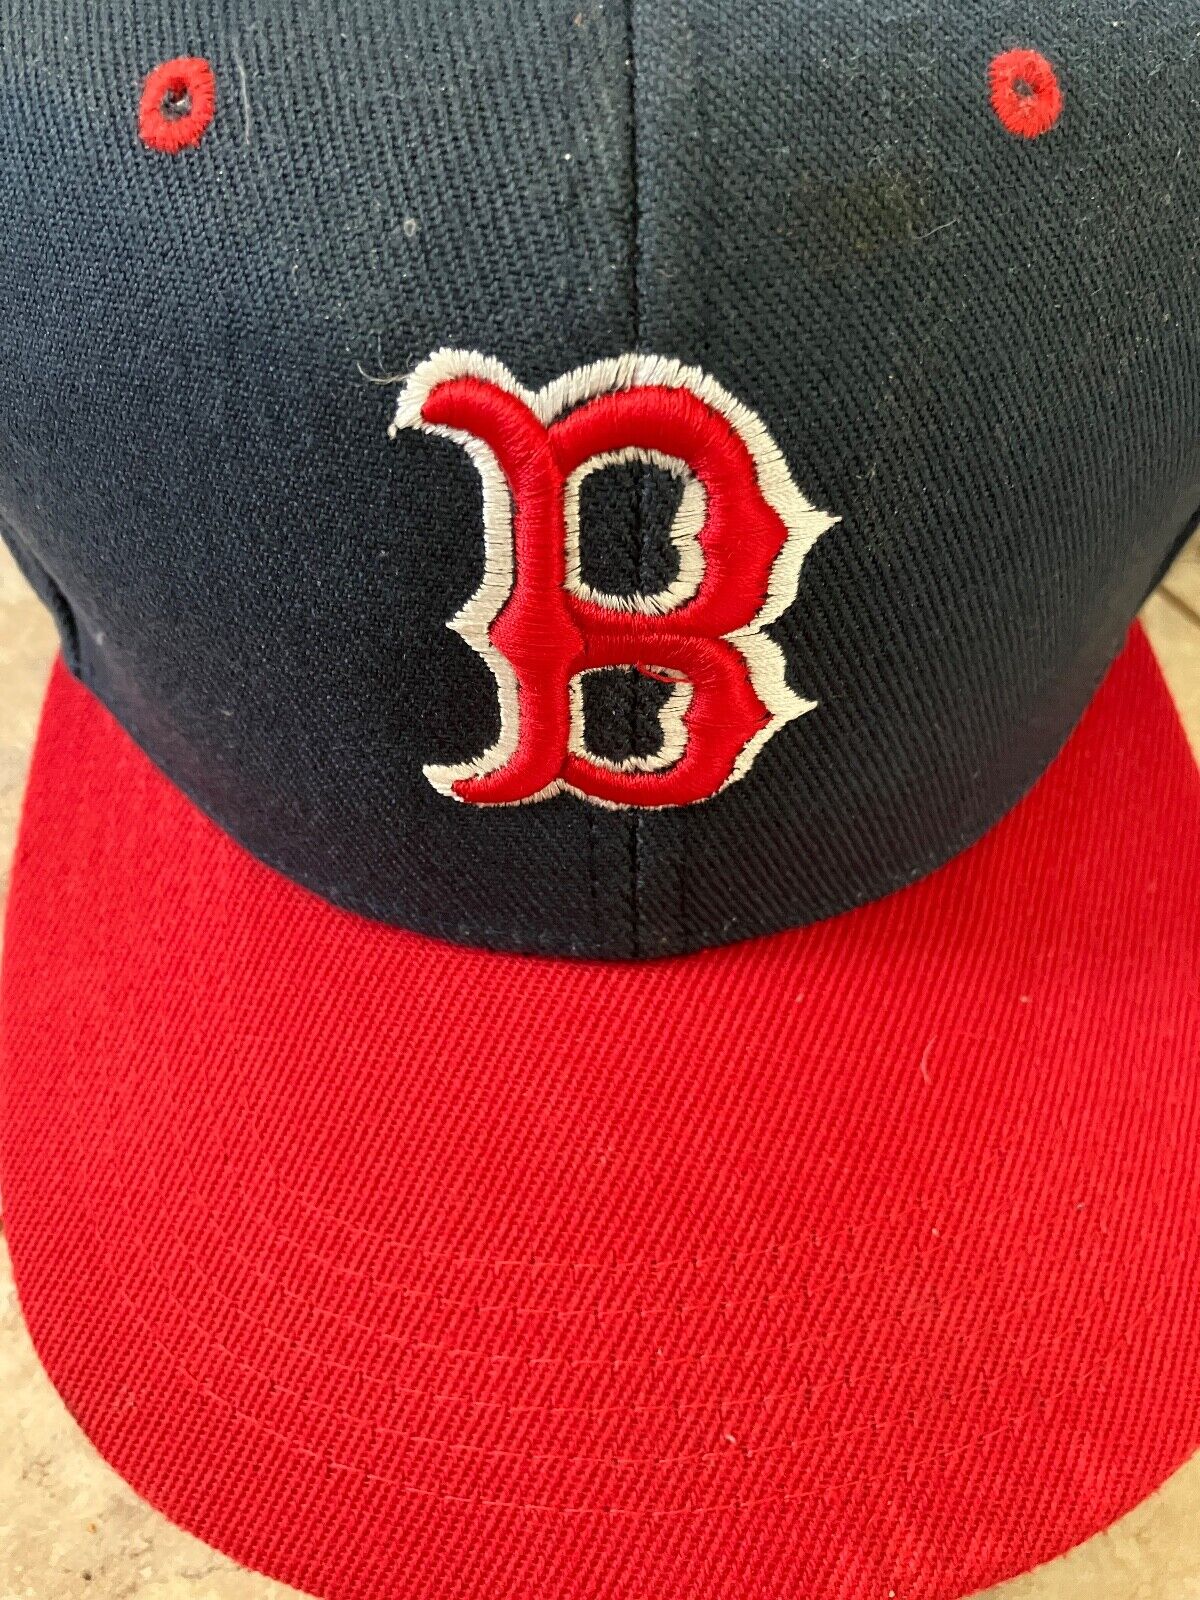 Boston Red Sox baseball supreme cap one size fits all 100 acrylic made in China